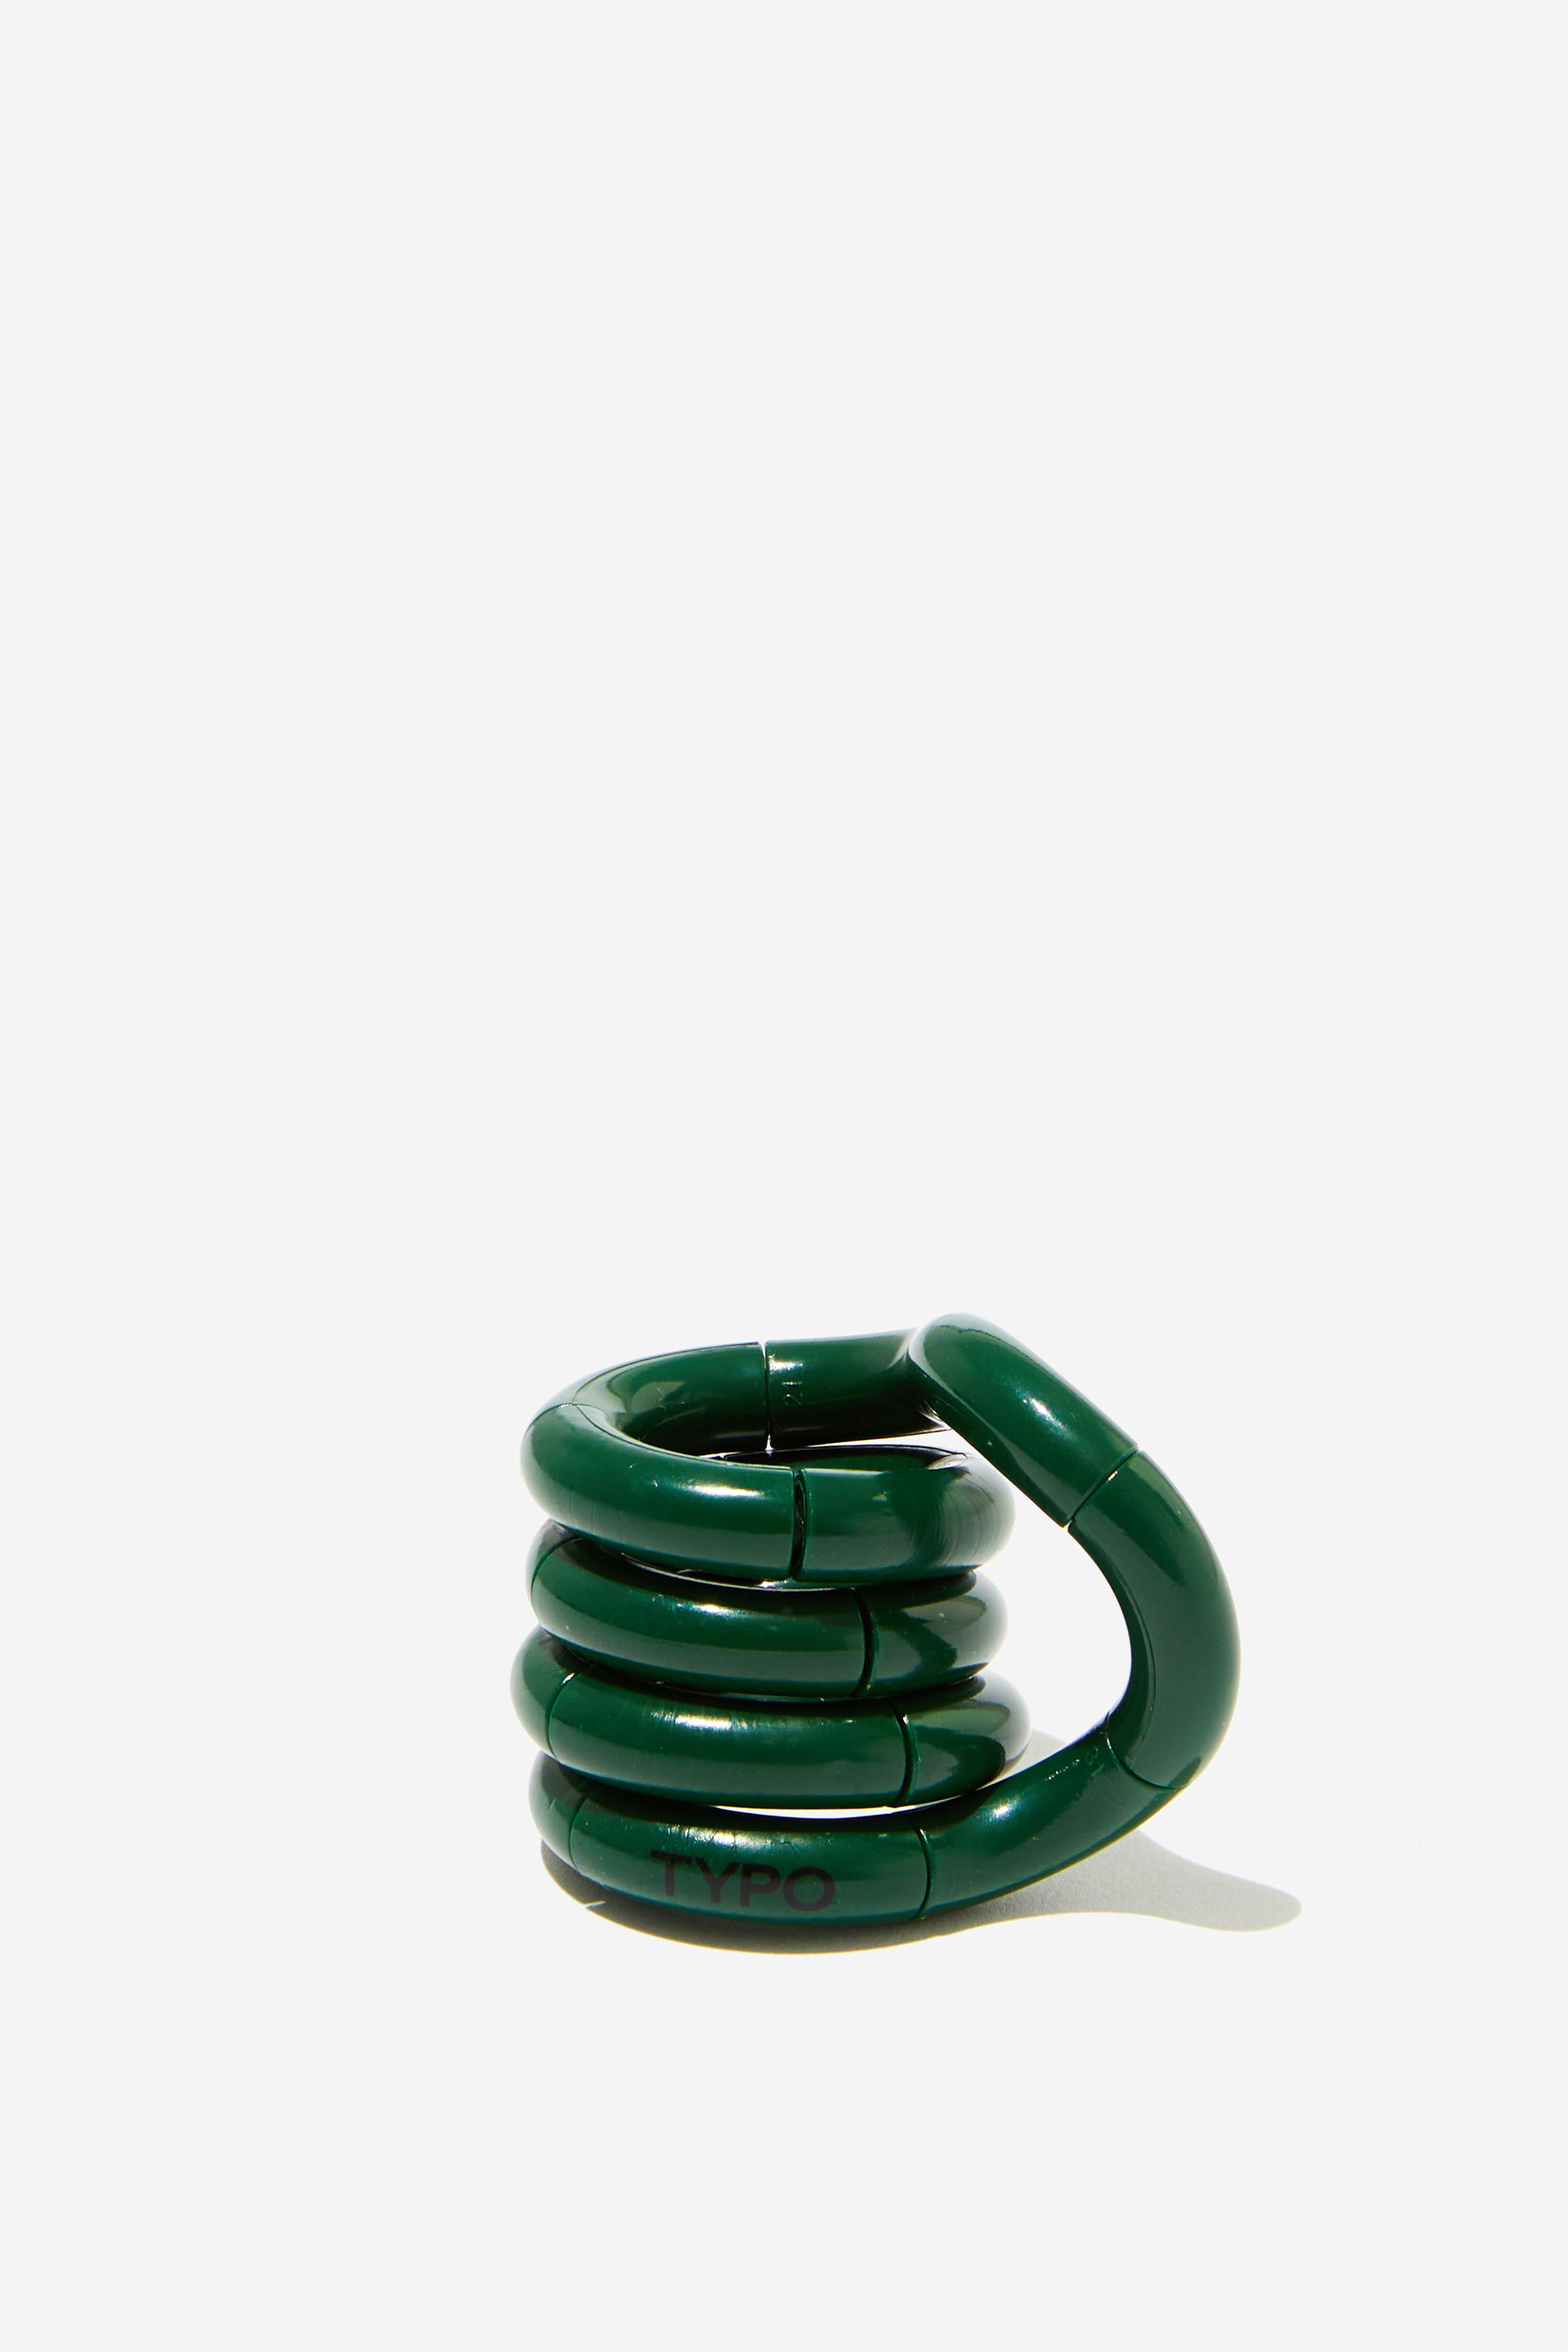 Typo - Knot This Twisting Gadget - Heritage green